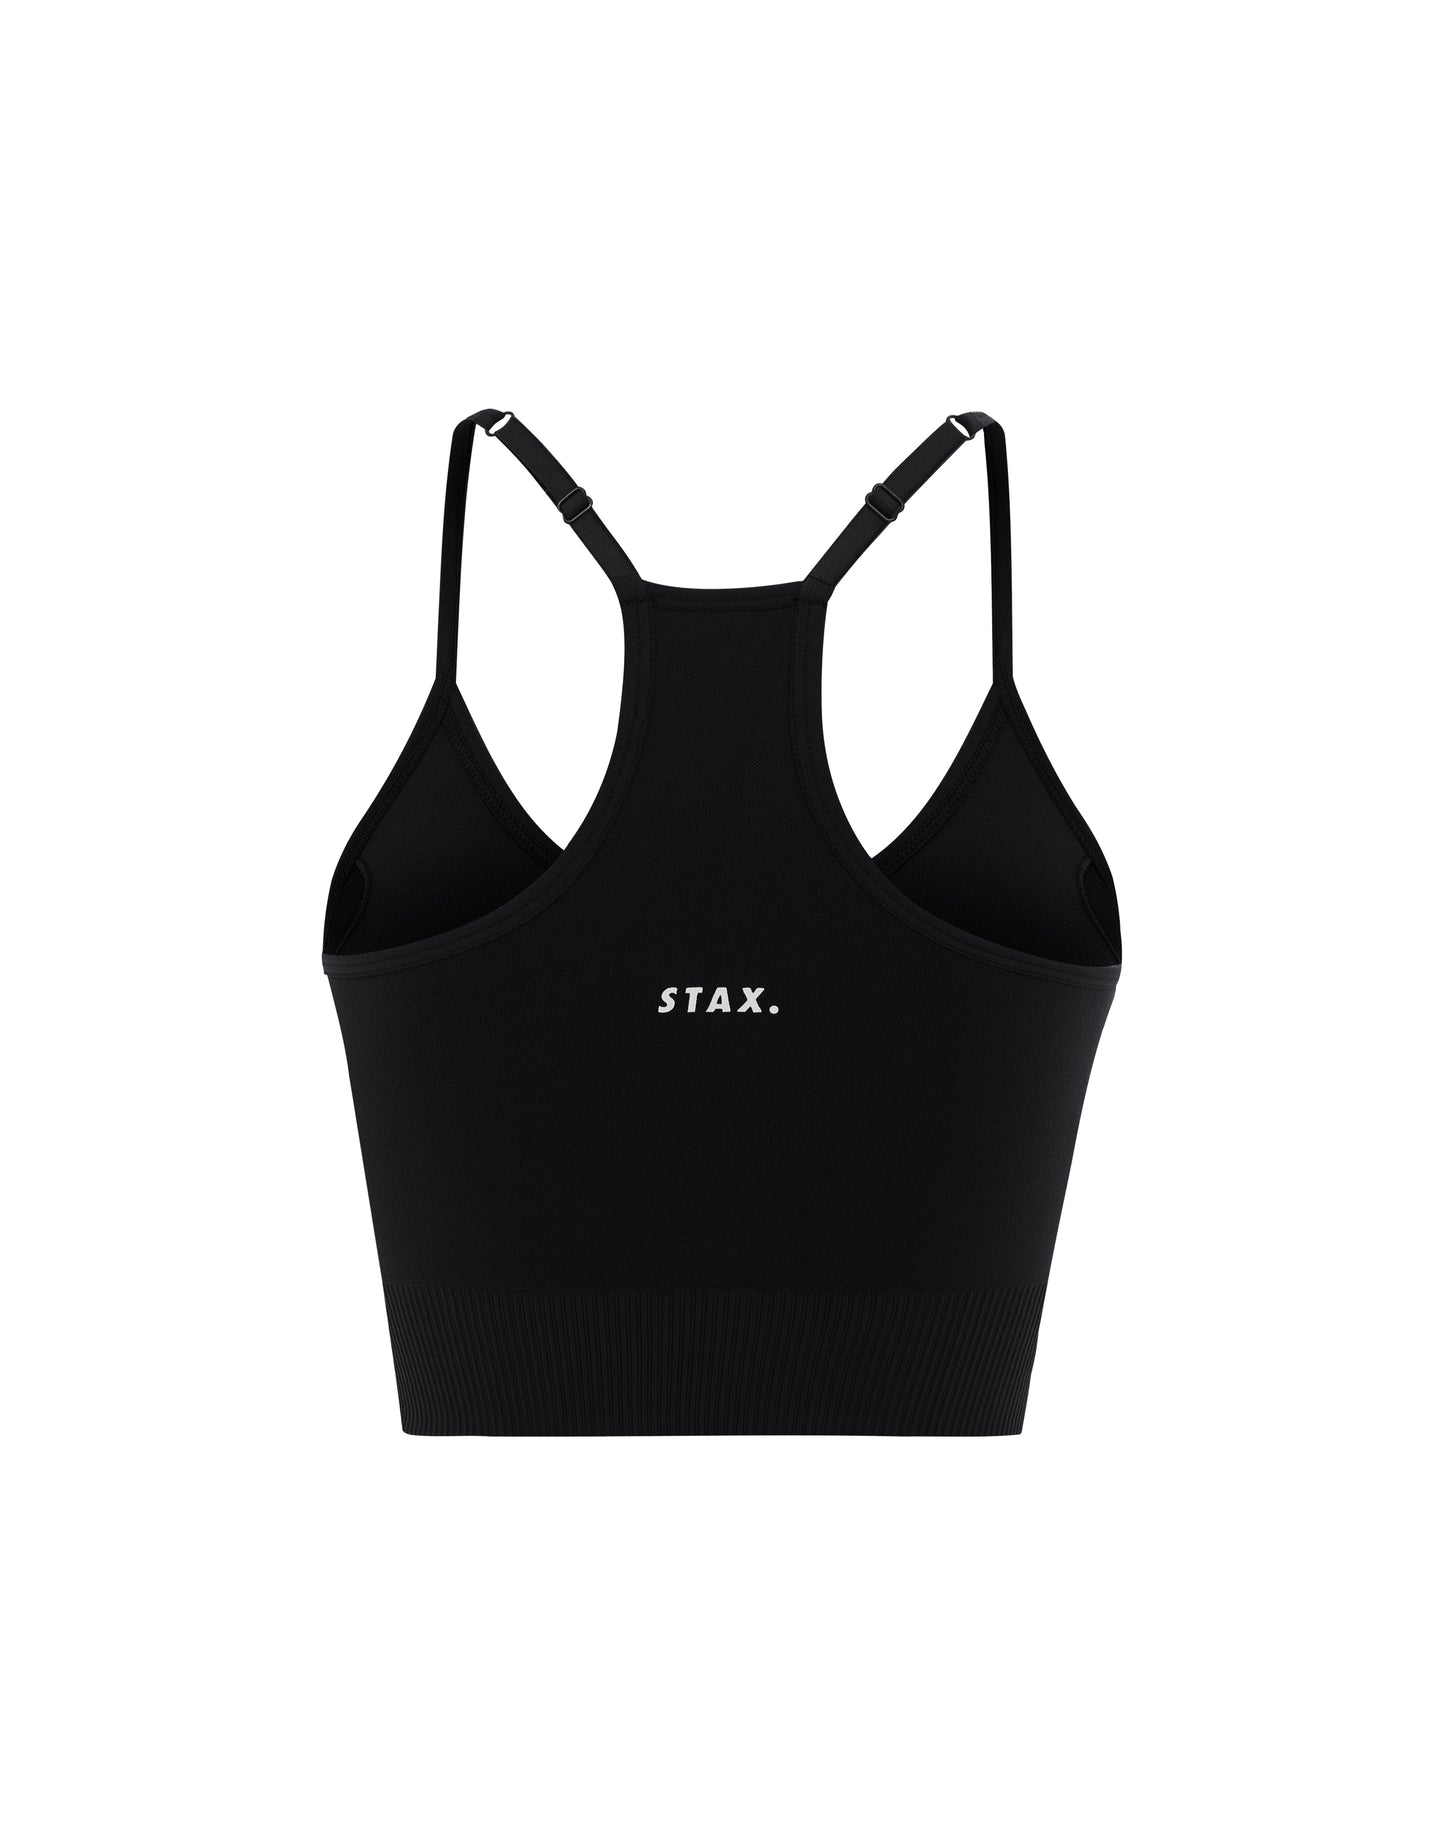 STAX. PSF Strappy Crop - Astro